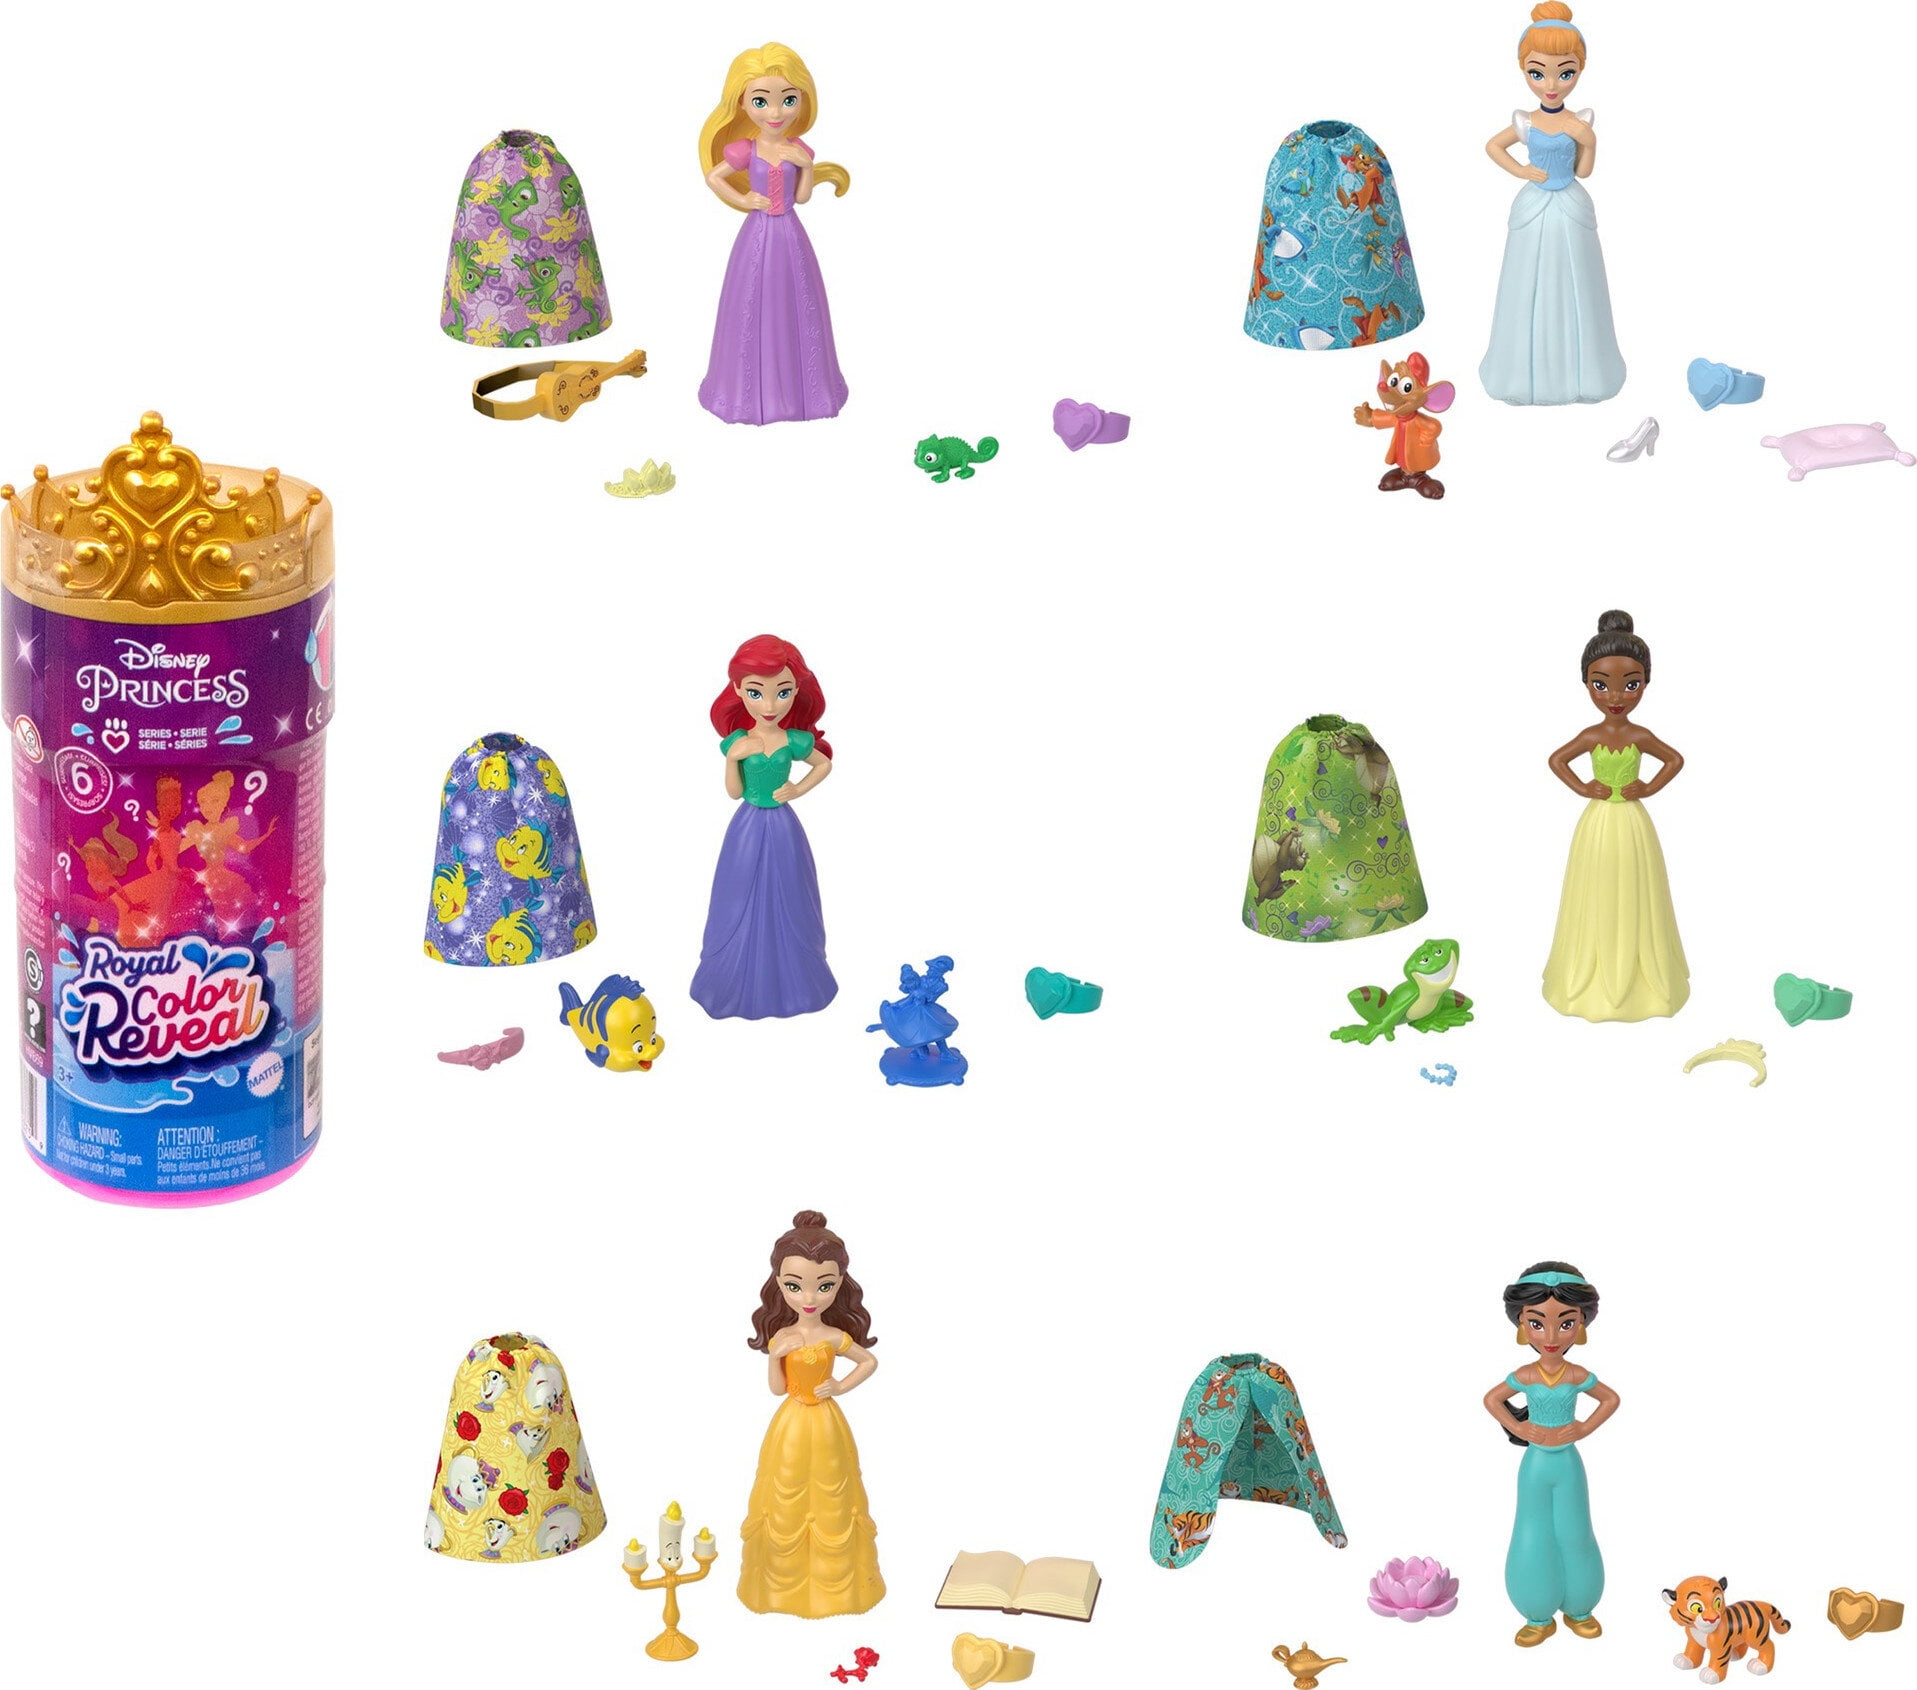 Disney Princess Royal Color Reveal Doll, 6 Surprises Include Character Figure Inspired by Disney Movies